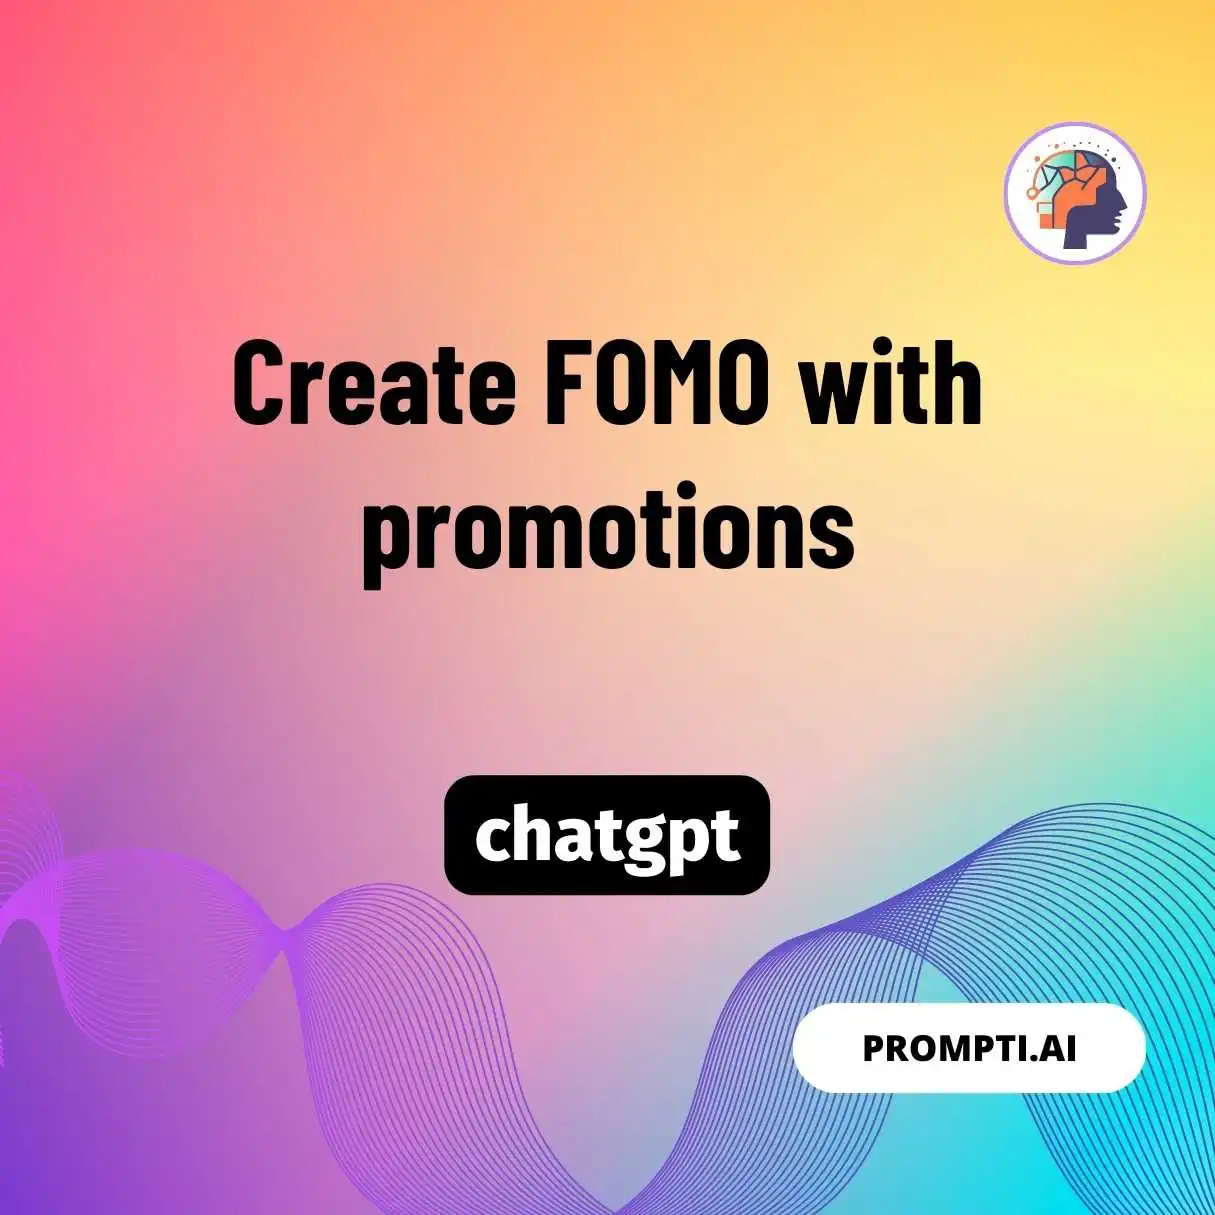 Create FOMO with promotions